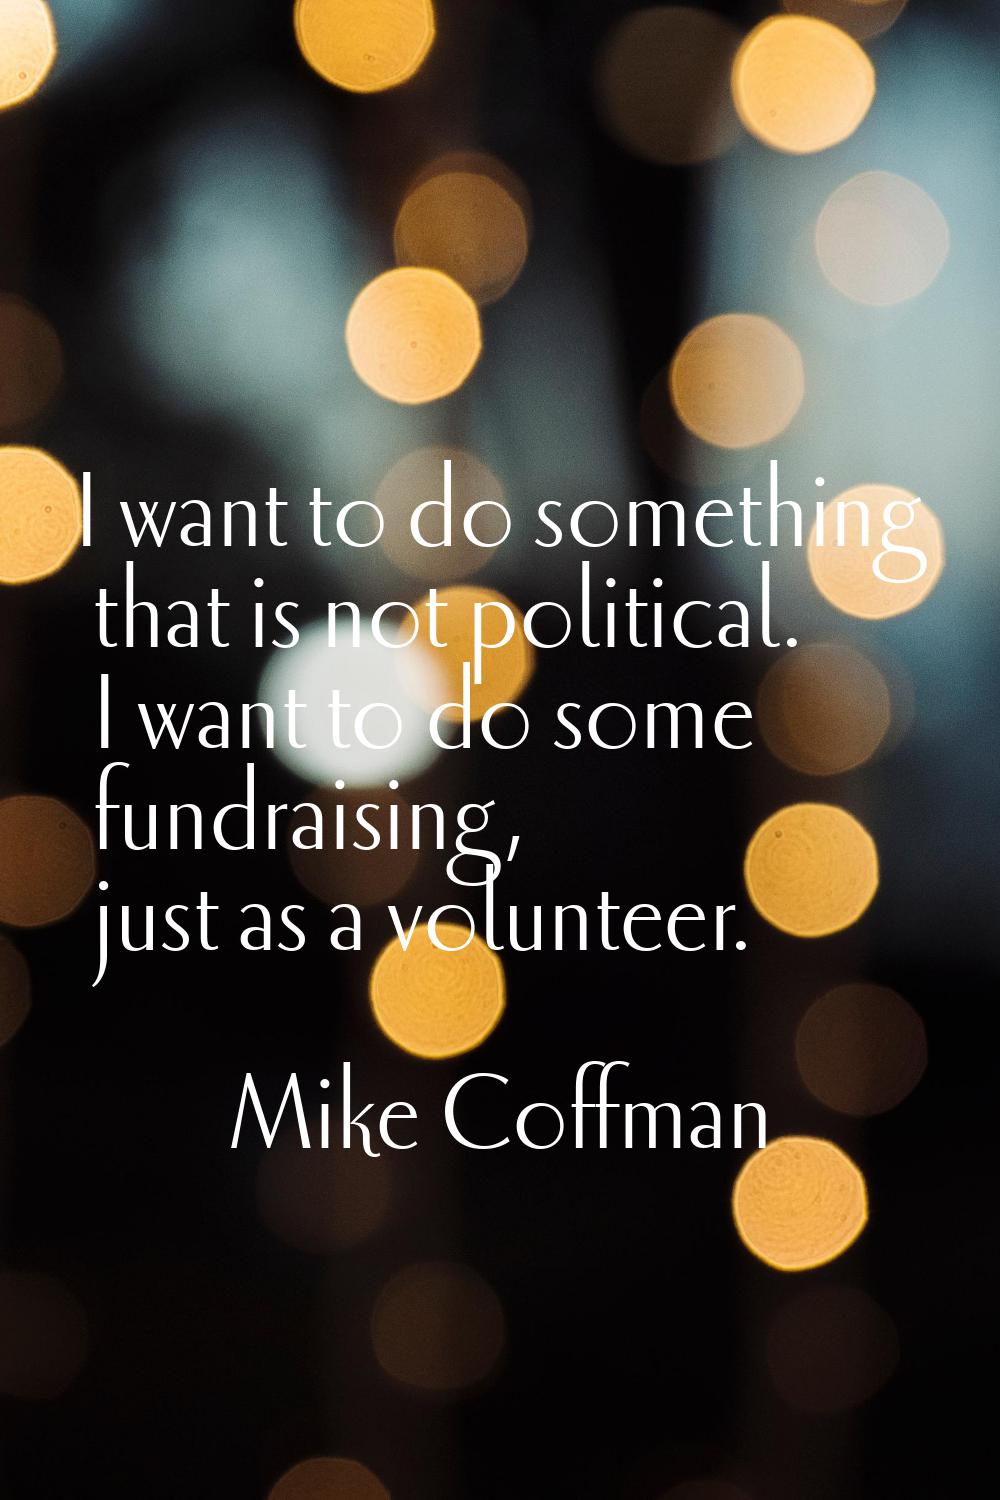 I want to do something that is not political. I want to do some fundraising, just as a volunteer.